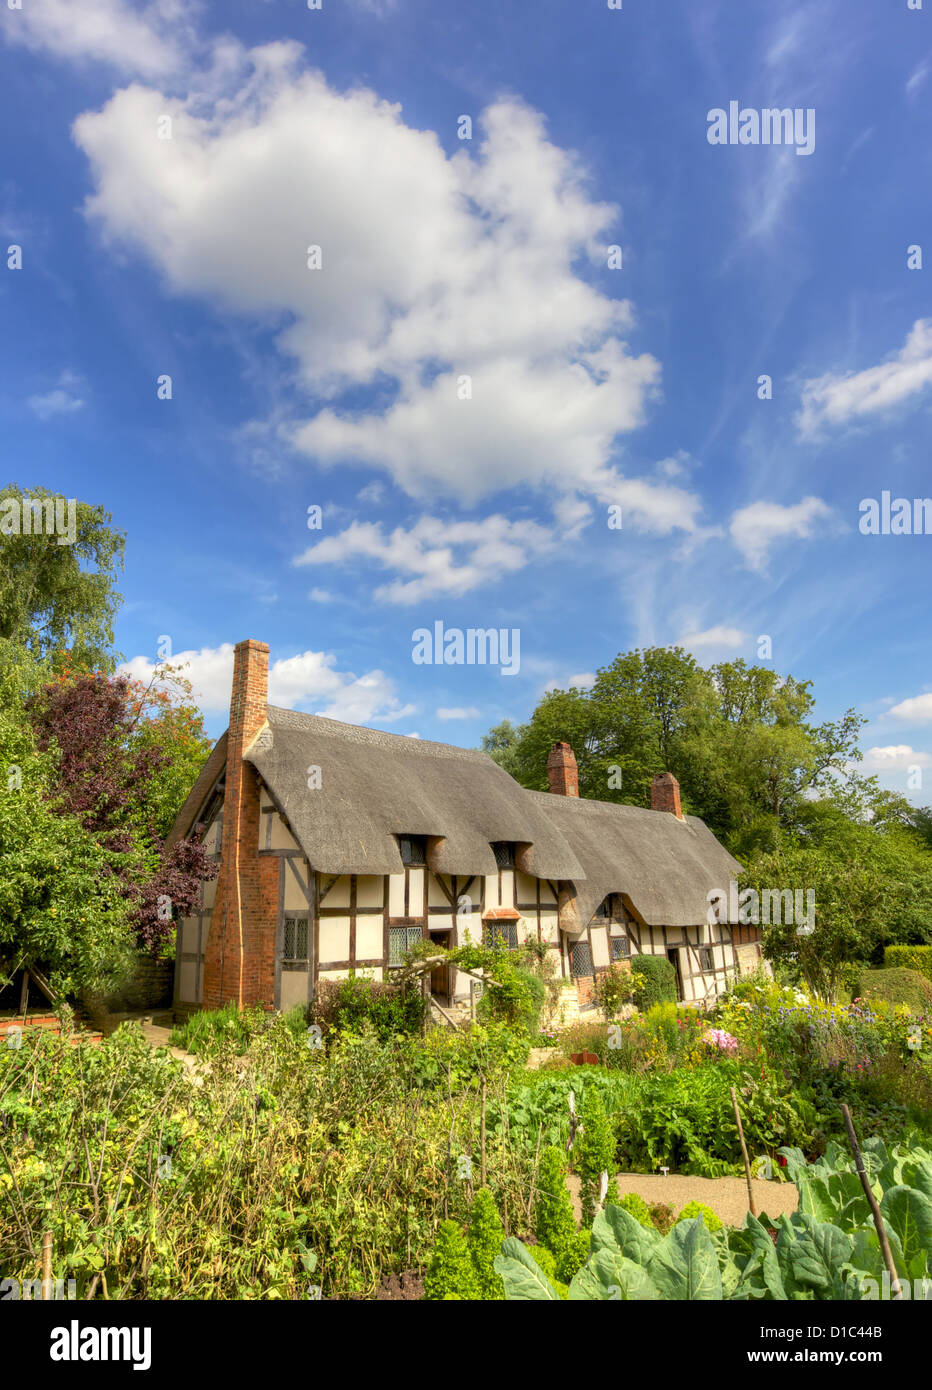 Anne Hathaway's (William Shakespeare's wife) famous thatched cottage and garden at Shottery, just outside Stratford upon Avon. Stock Photo